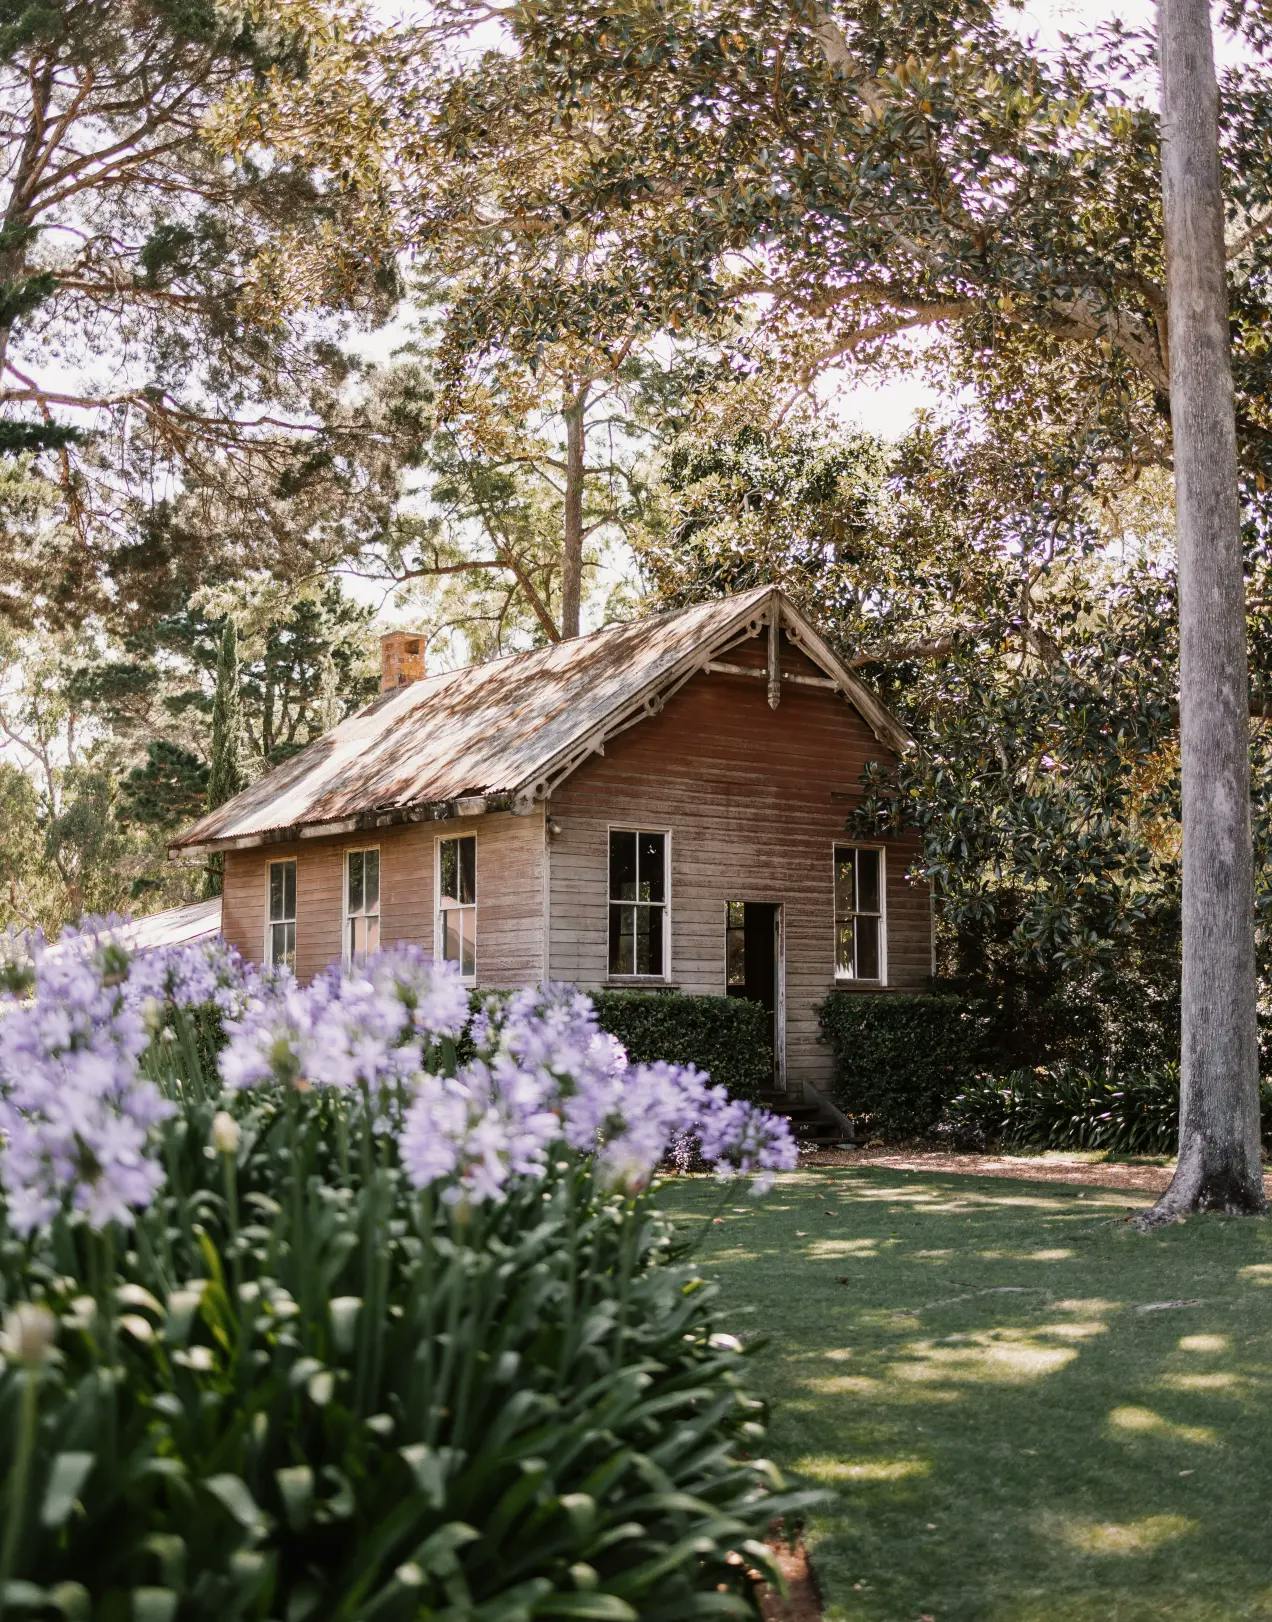 A wooden cabin with a steeply pitched roof is nestled among tall trees and lush greenery. Purple flowers bloom in the foreground, enhancing the idyllic and serene atmosphere of the scene. Sunlight filters through the trees, casting dappled shadows on the ground.